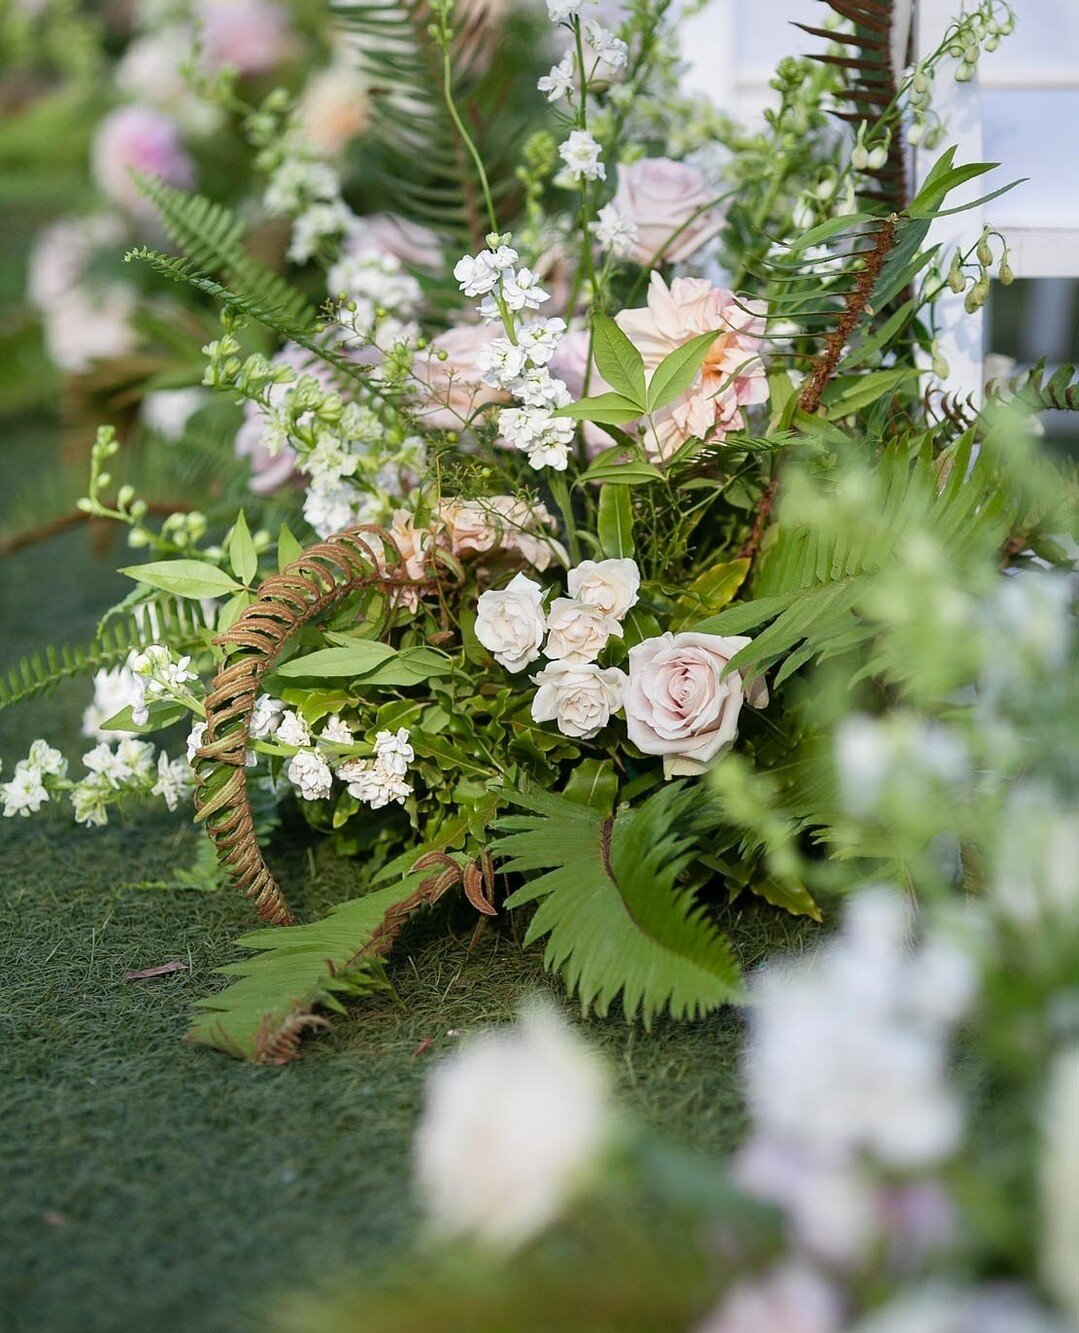 Remembering @nancyliuchin's amazing flowers at Nicole &amp; Damian's wedding. So many beautiful things about this wedding. More coming in my stories &amp; reels.⁠ Happy anniversary Nicole and Damien!⁠
-with @asavvyevent @asekimberly and @nancyliuchin